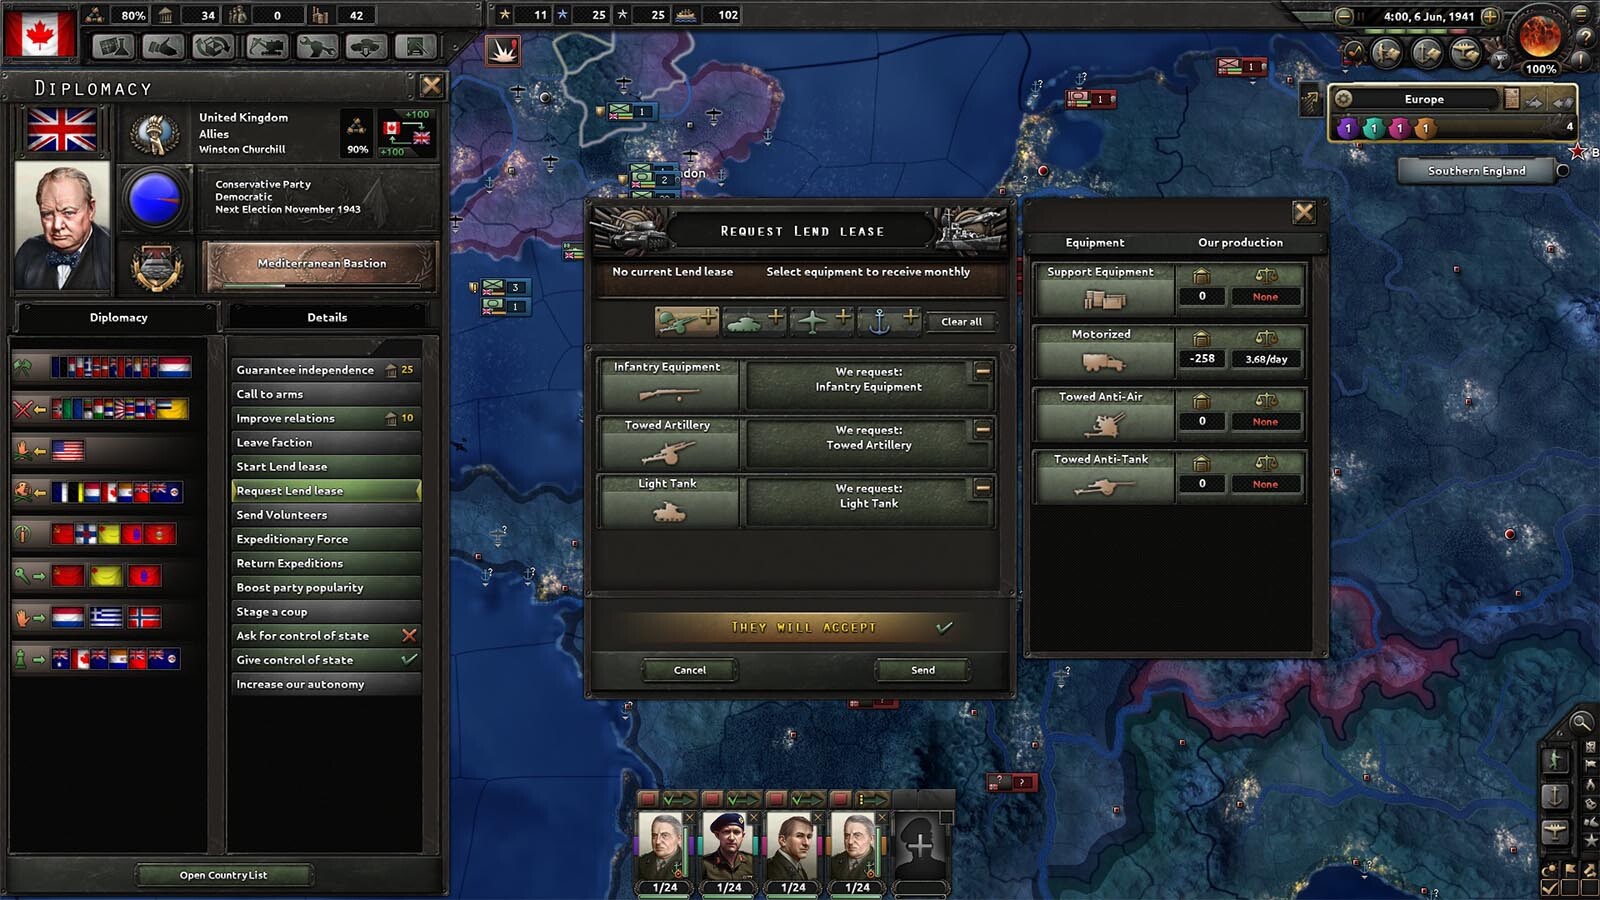 hearts of iron 4 dlc steam page